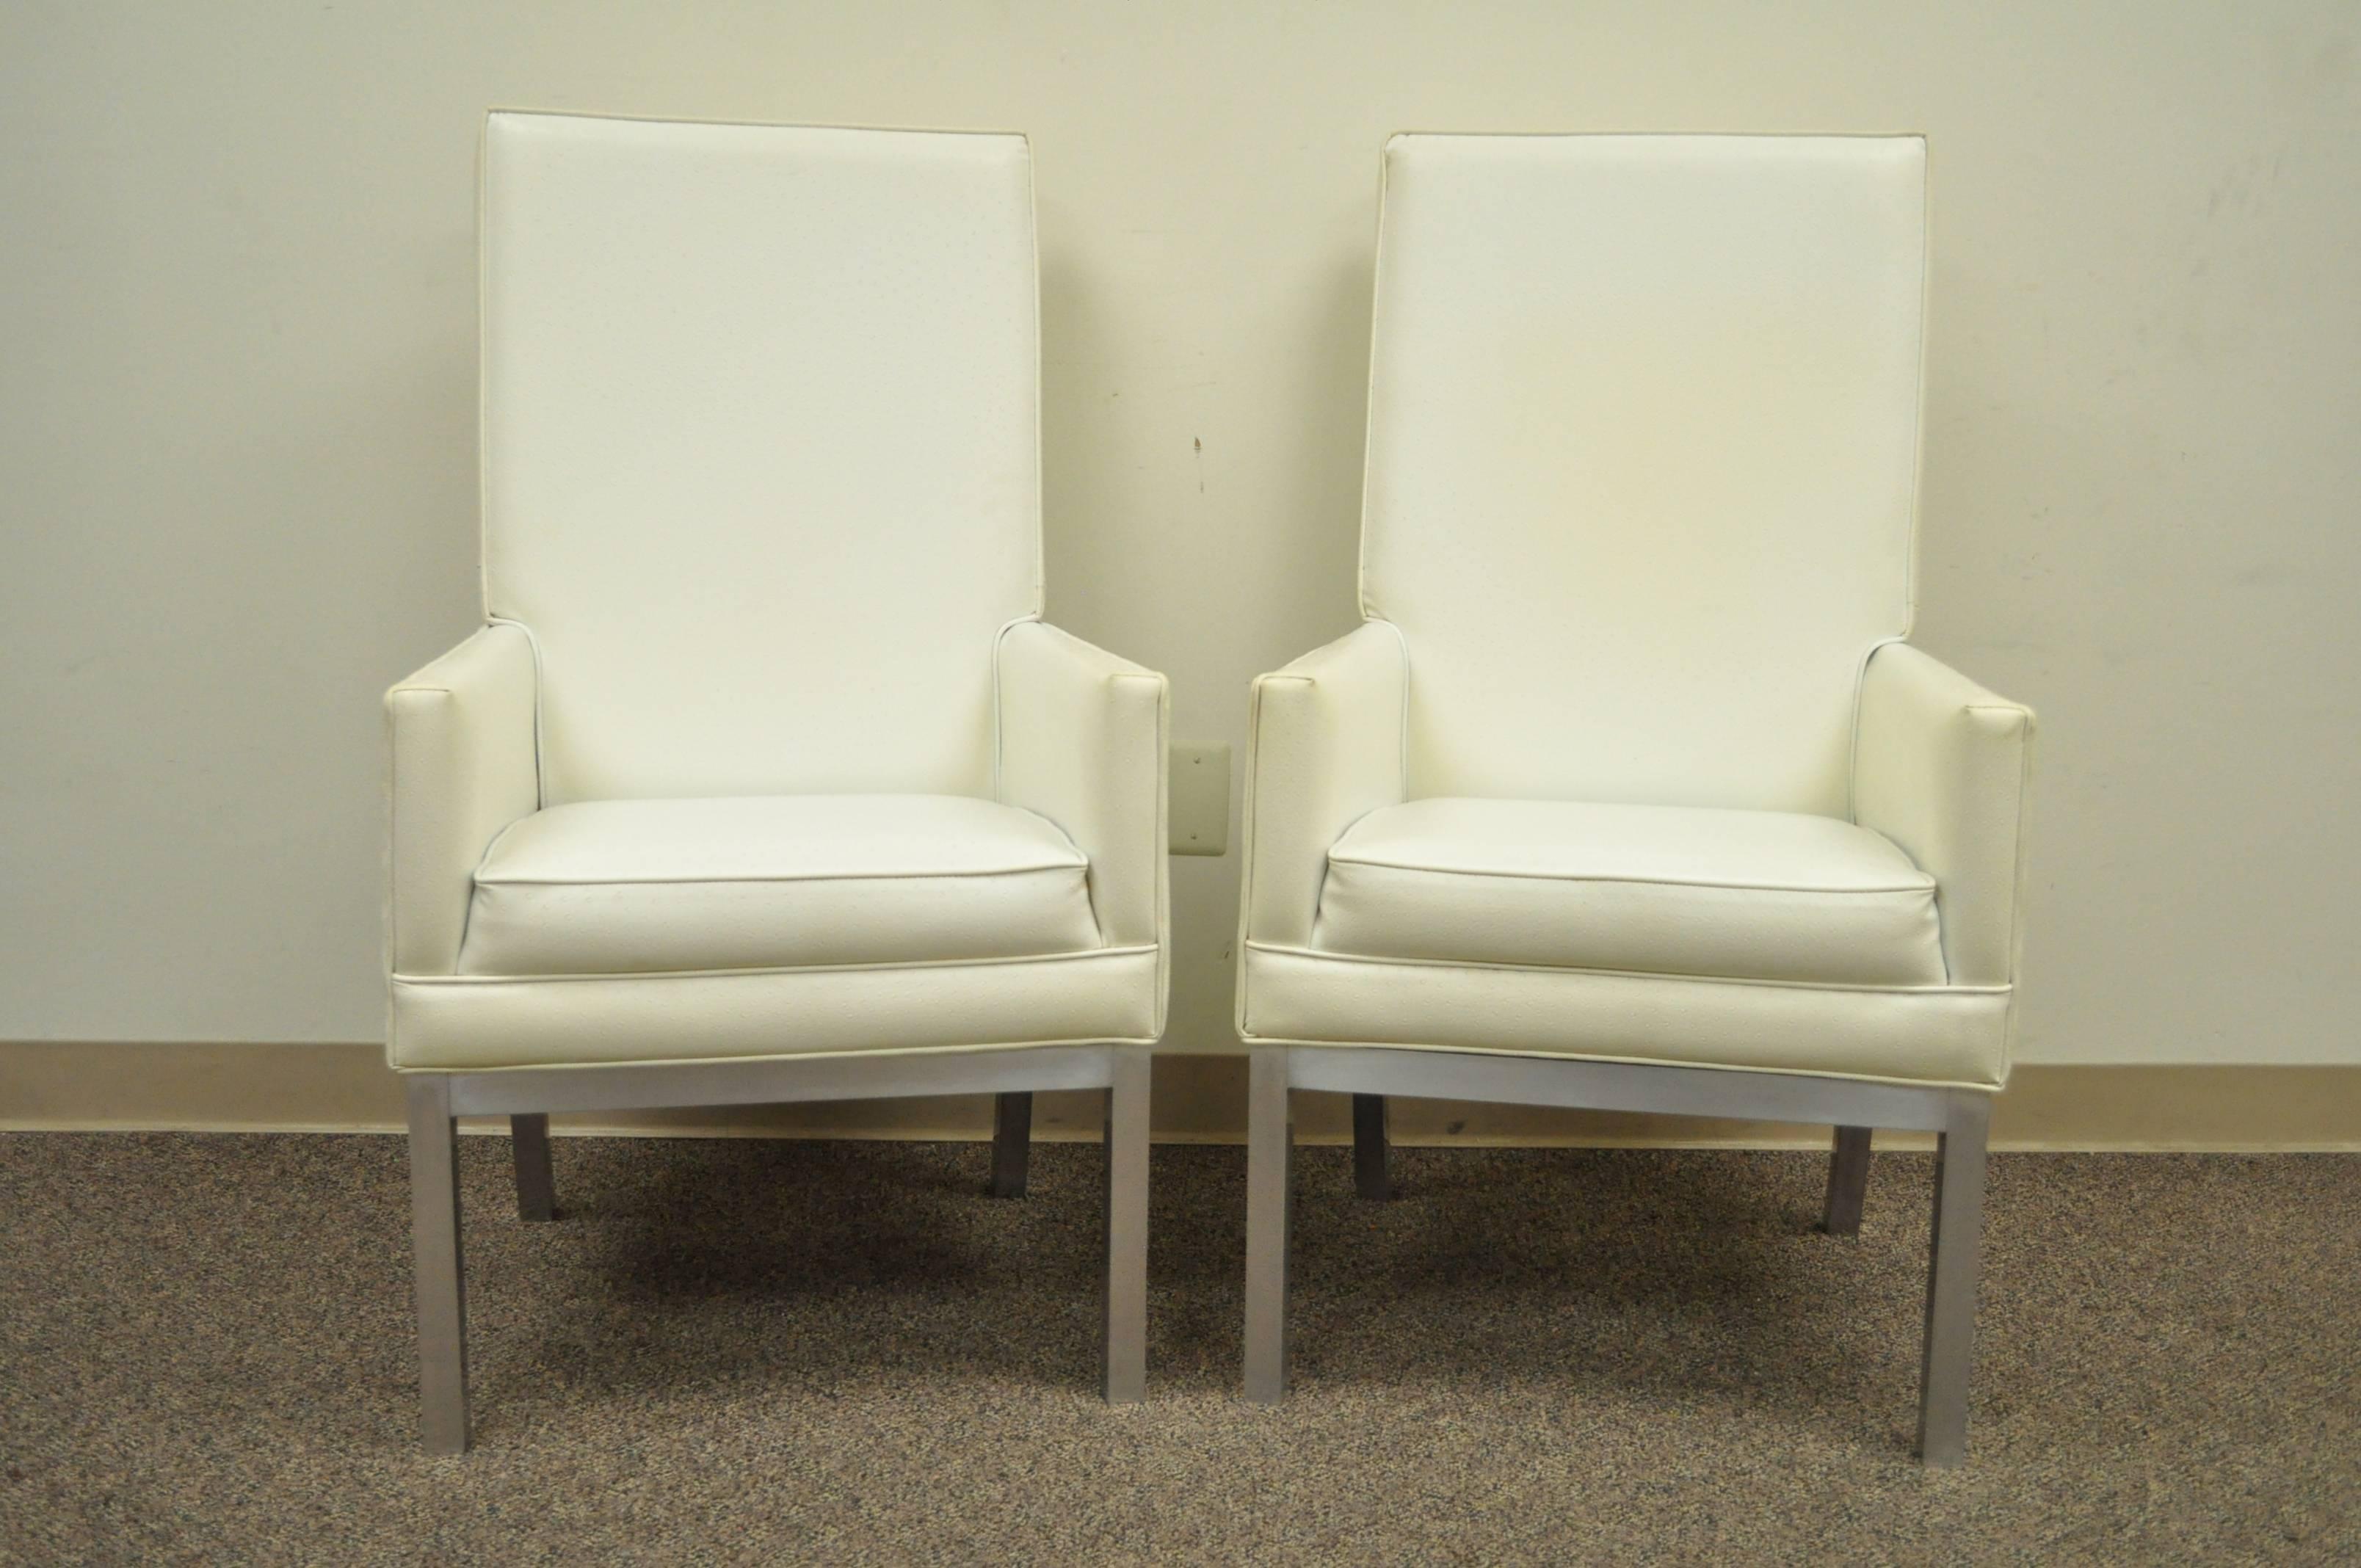 Great Pair of Vintage, Modernist, Armchairs in the Parsons Style. The pair features tall comfortable backs, angled rear legs, clean lines, brushed aluminum bases, and great overall form. 